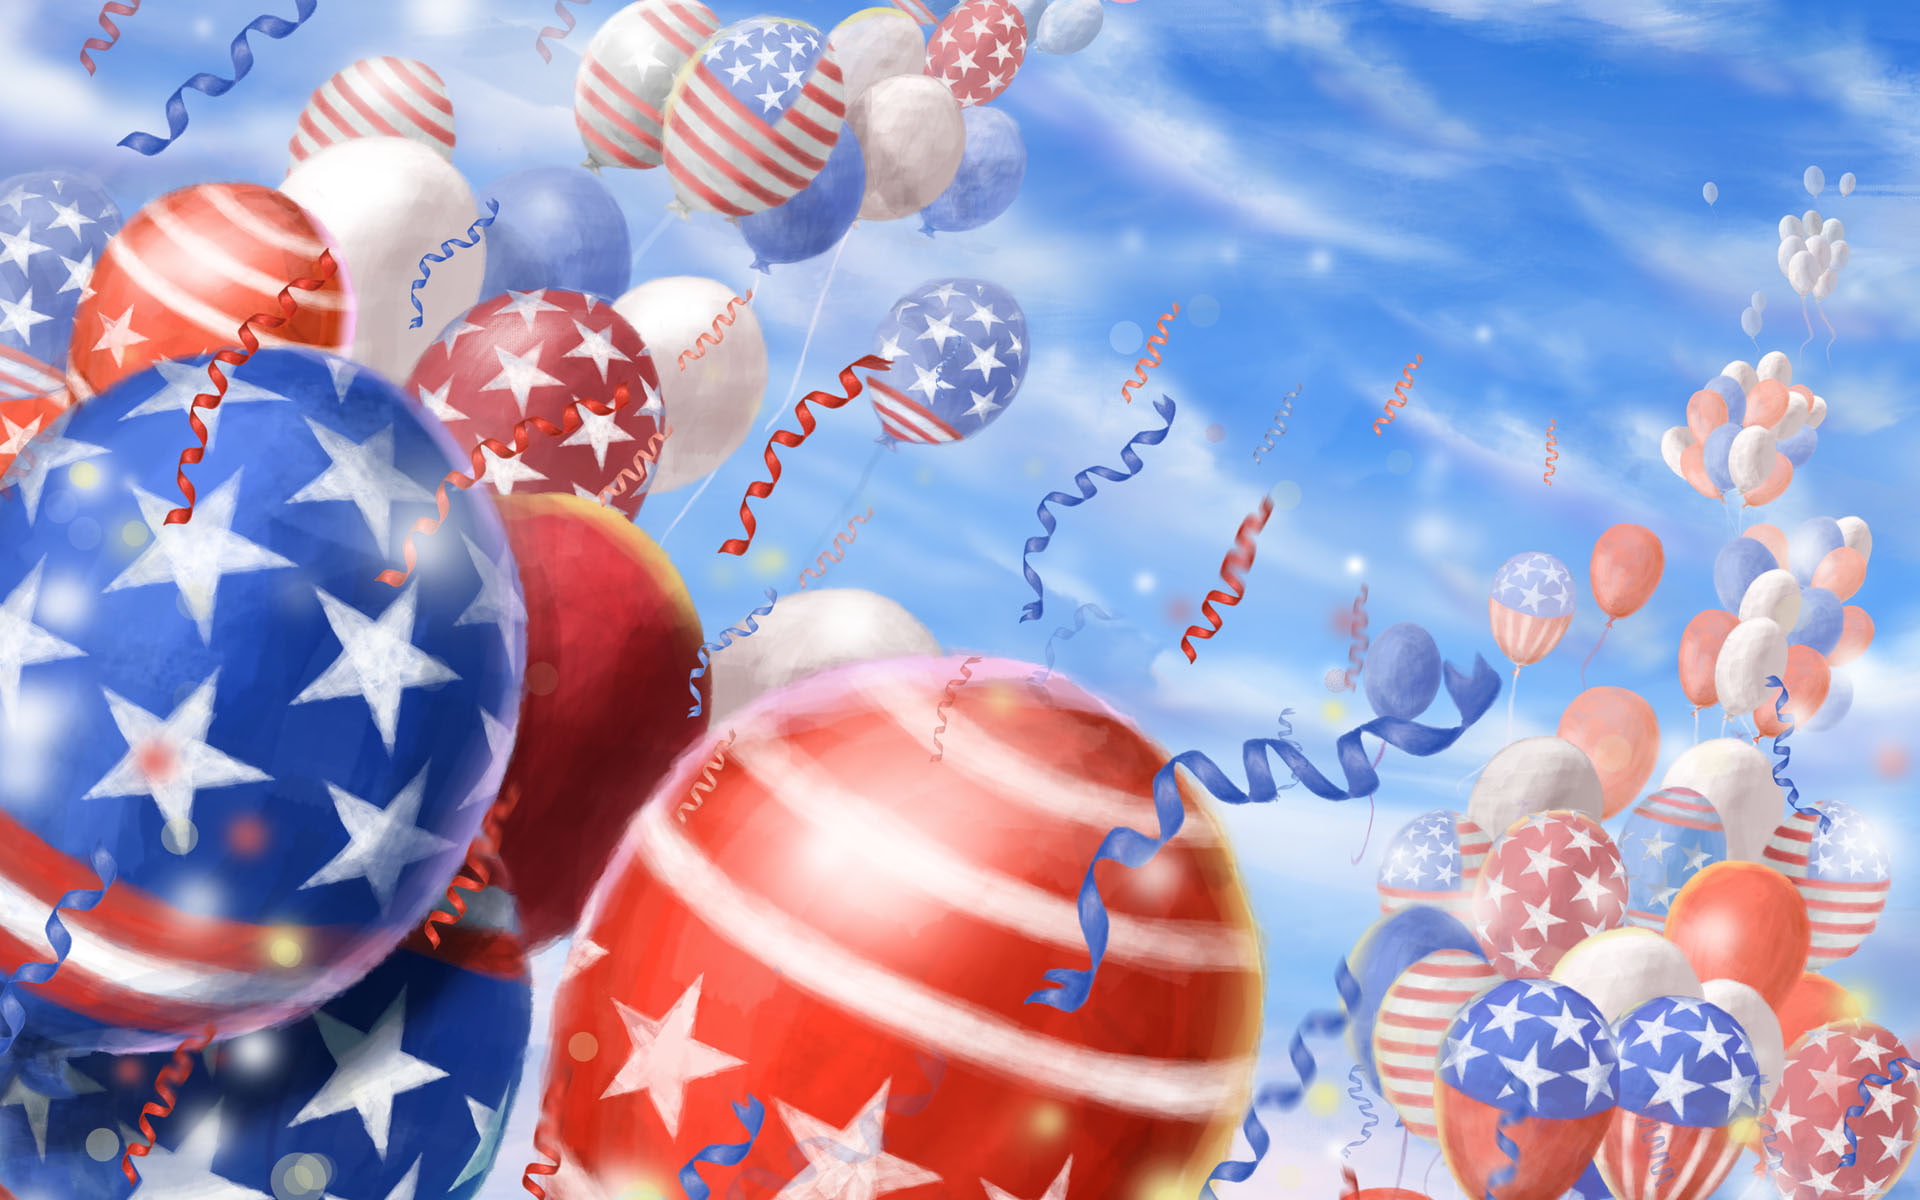 4 July Independence Day Usa Celebration Balloon Motifs Of American Flag Desktop Hd Wallpaper Download For Mobile And Tablet 1920×1200